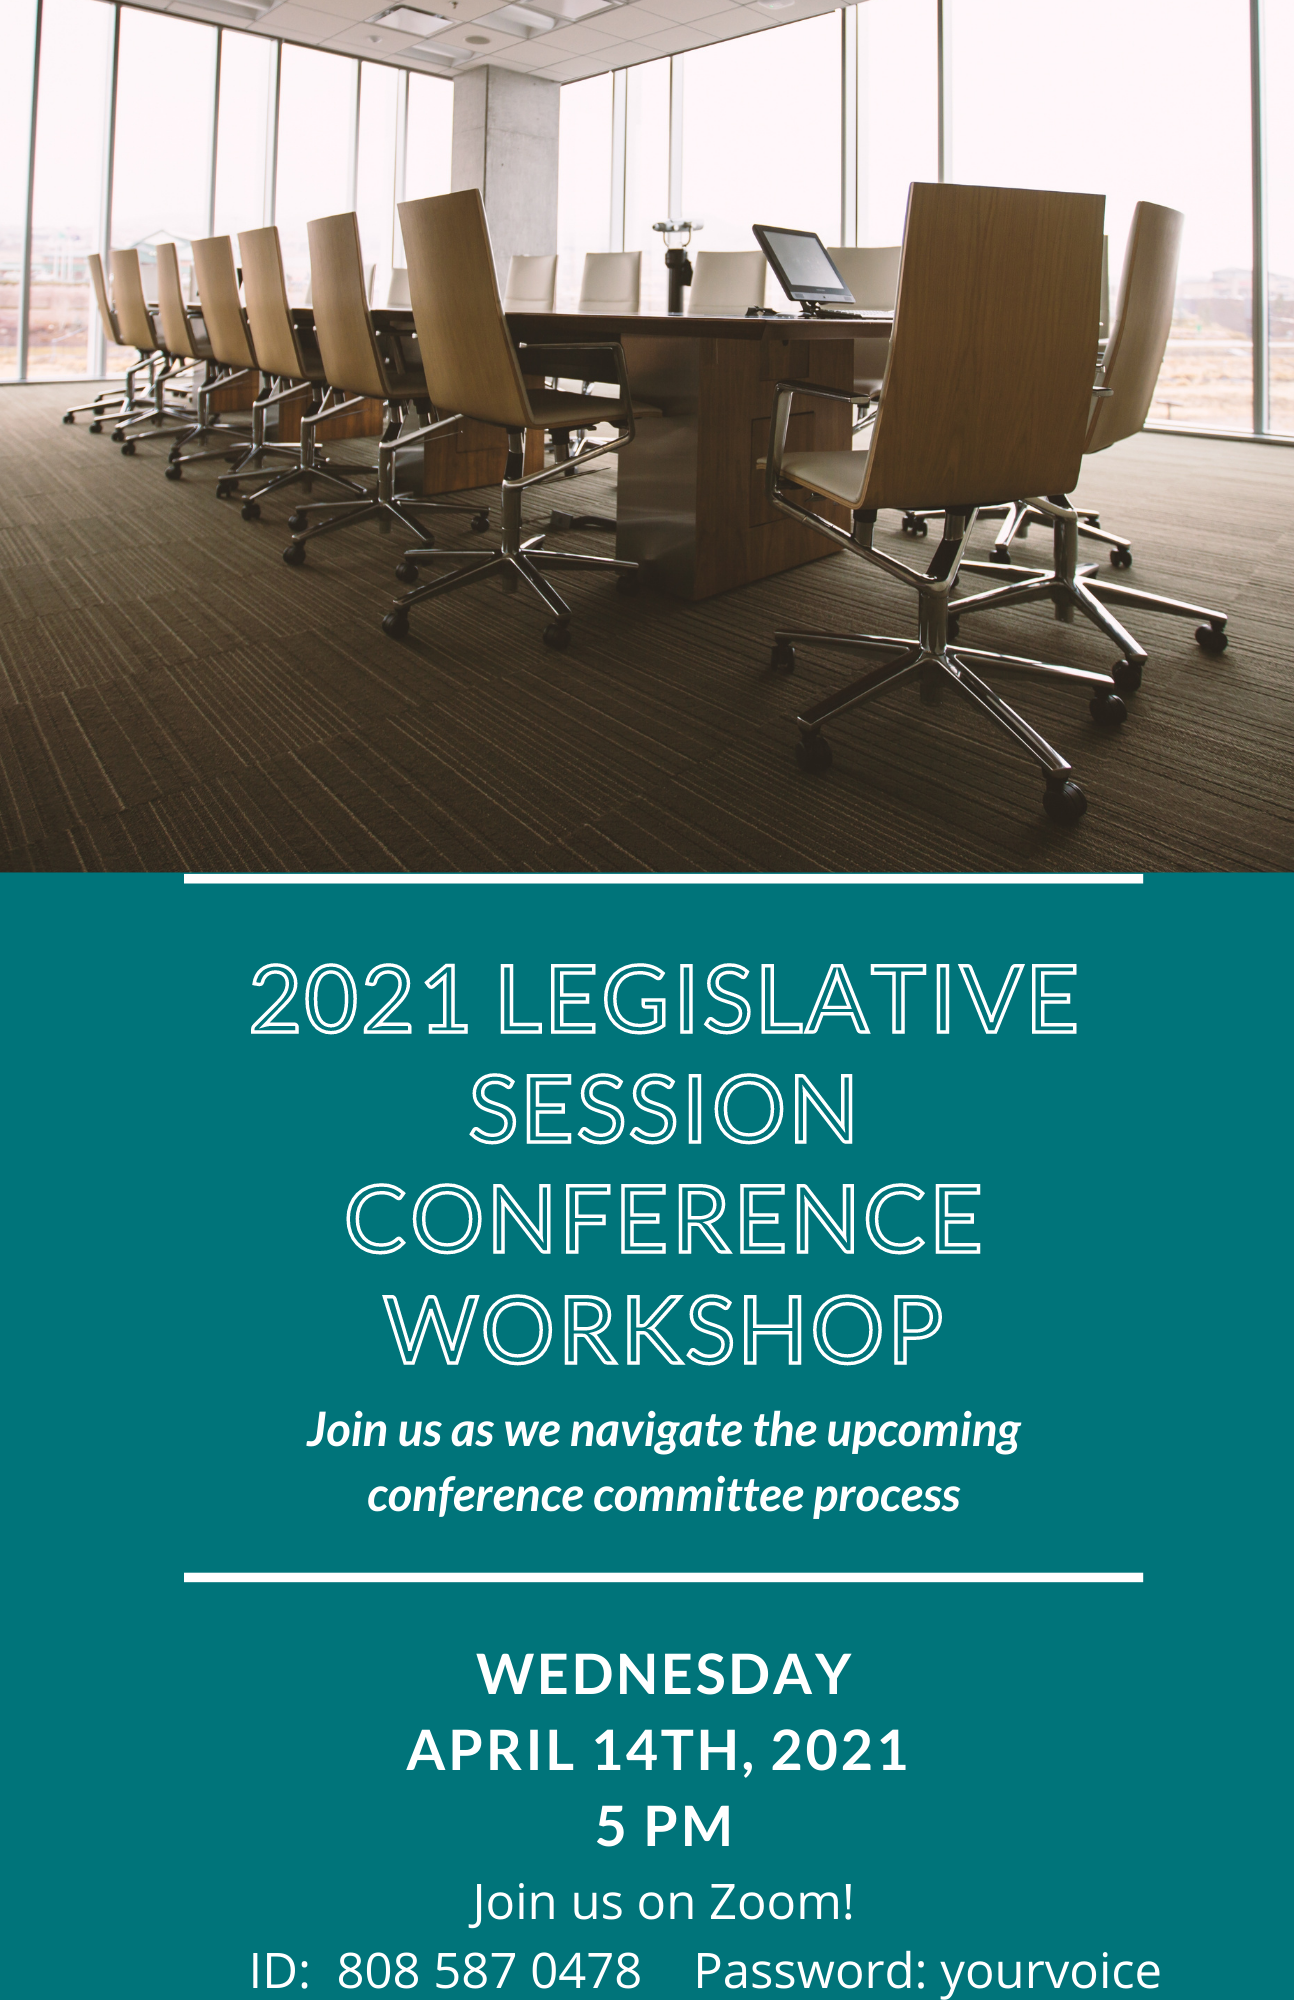 Conference table and workshop info, "Join us as we navigate the upcoming conference committee process"